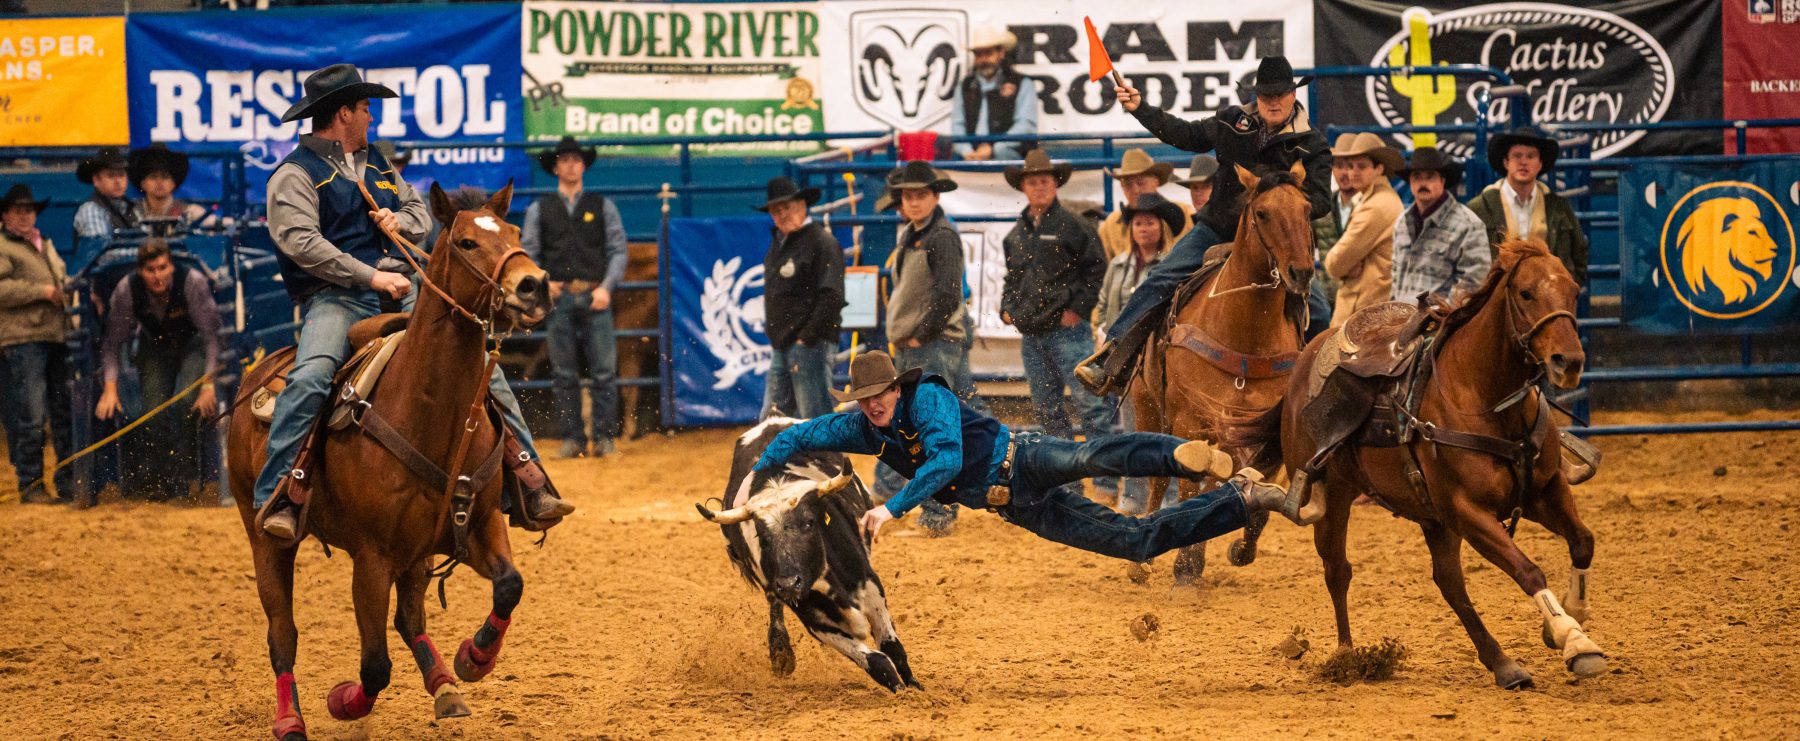 A person jumps off of a horse to tackle a steer during a rodeo event.